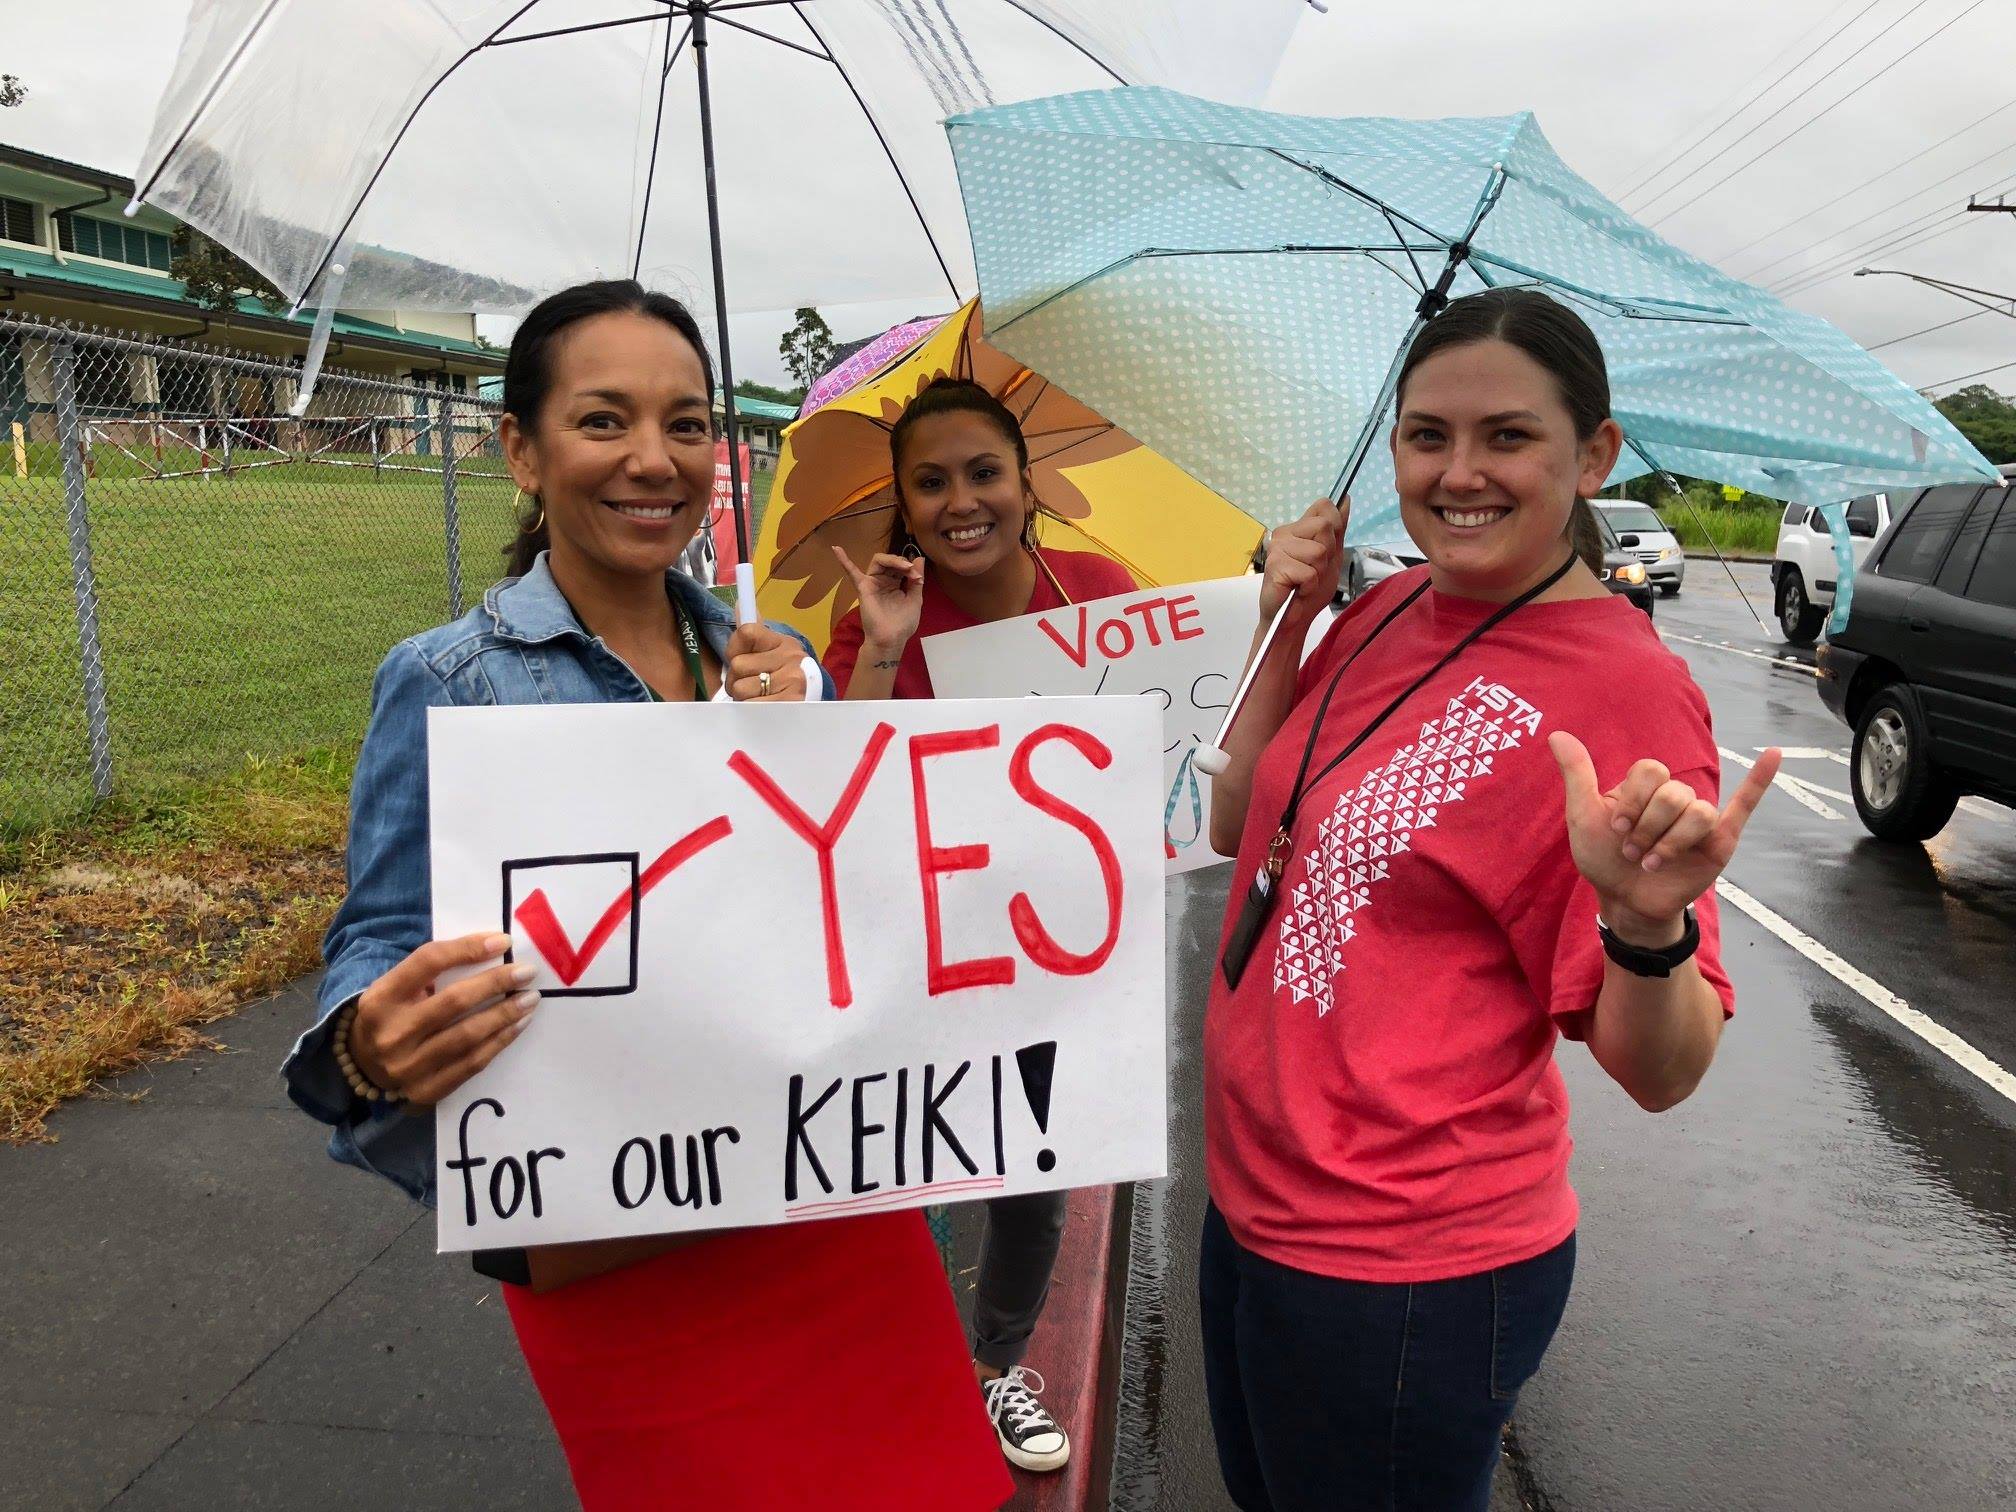 Teachers from Keaau Elementary School in Hilo on Hawaii’s Big Island campaigned for the constitutional amendment before school in October 2018.